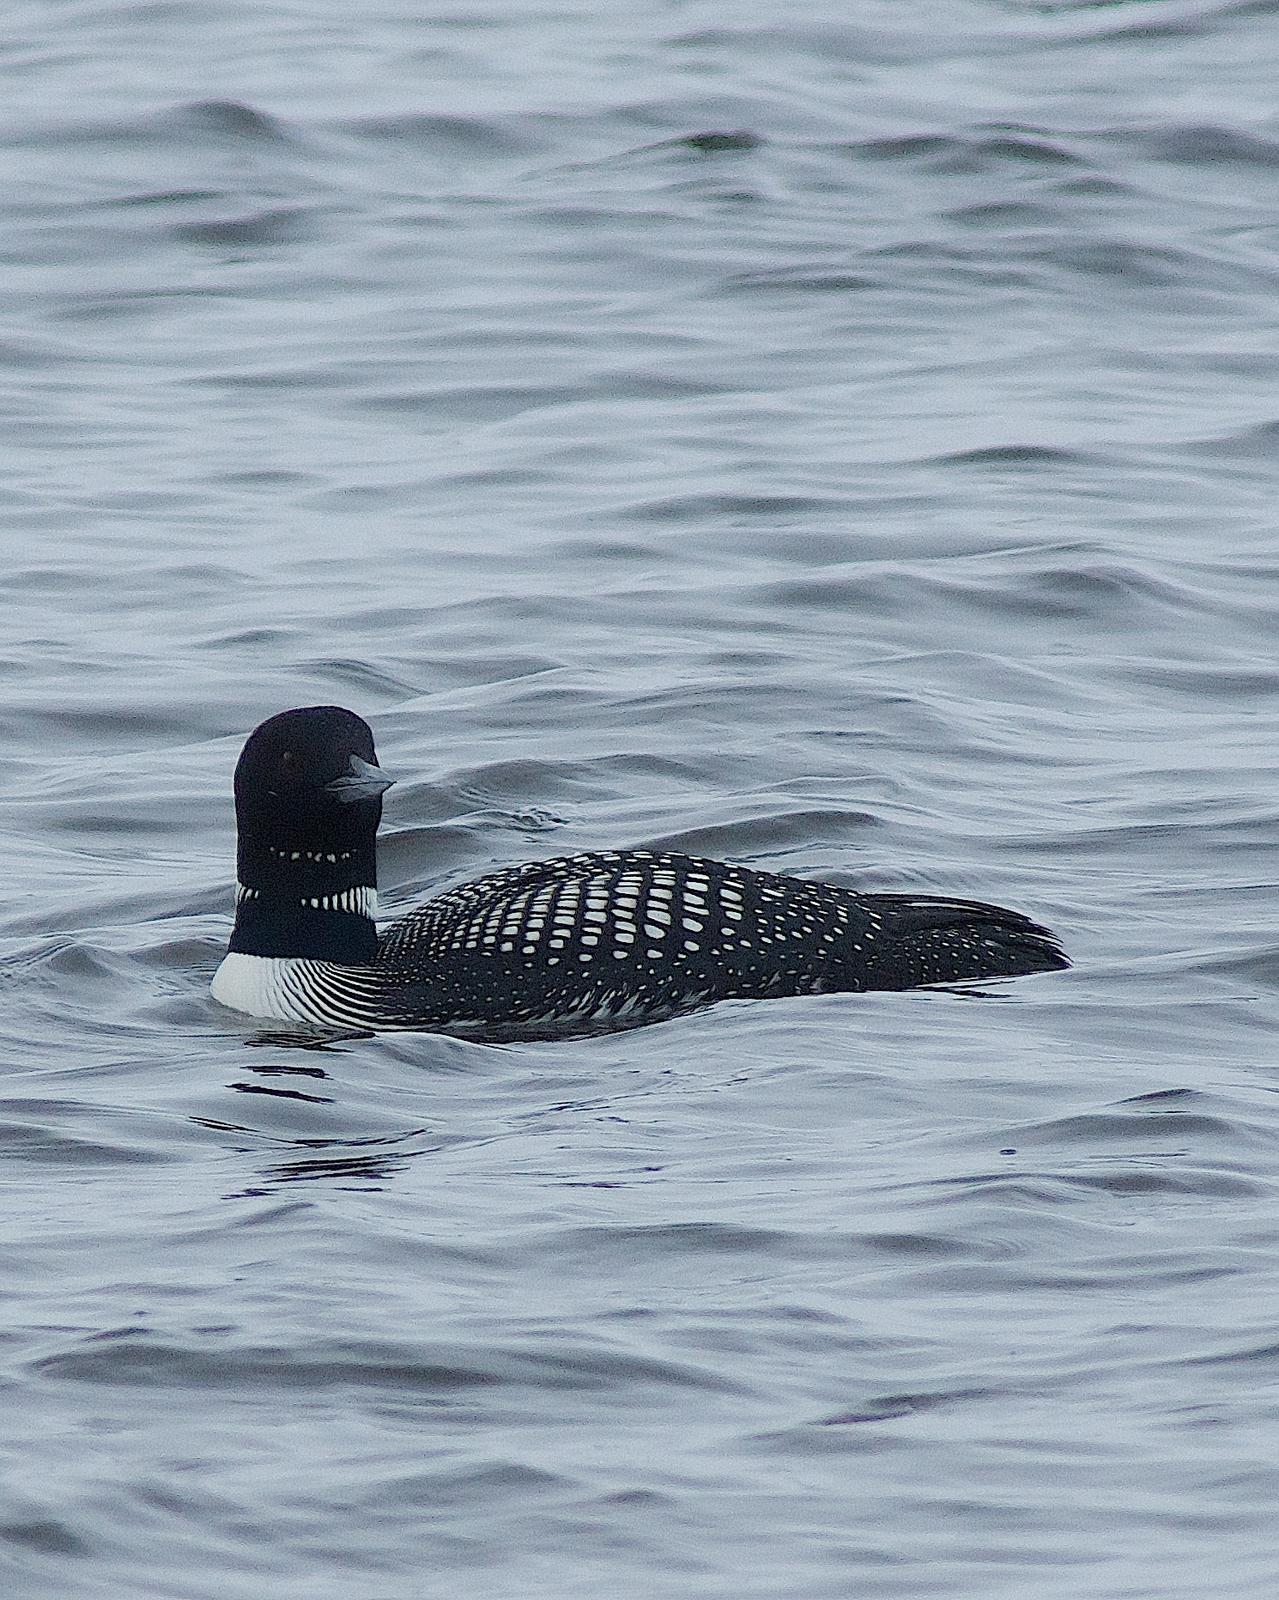 Common Loon Photo by Gerald Hoekstra